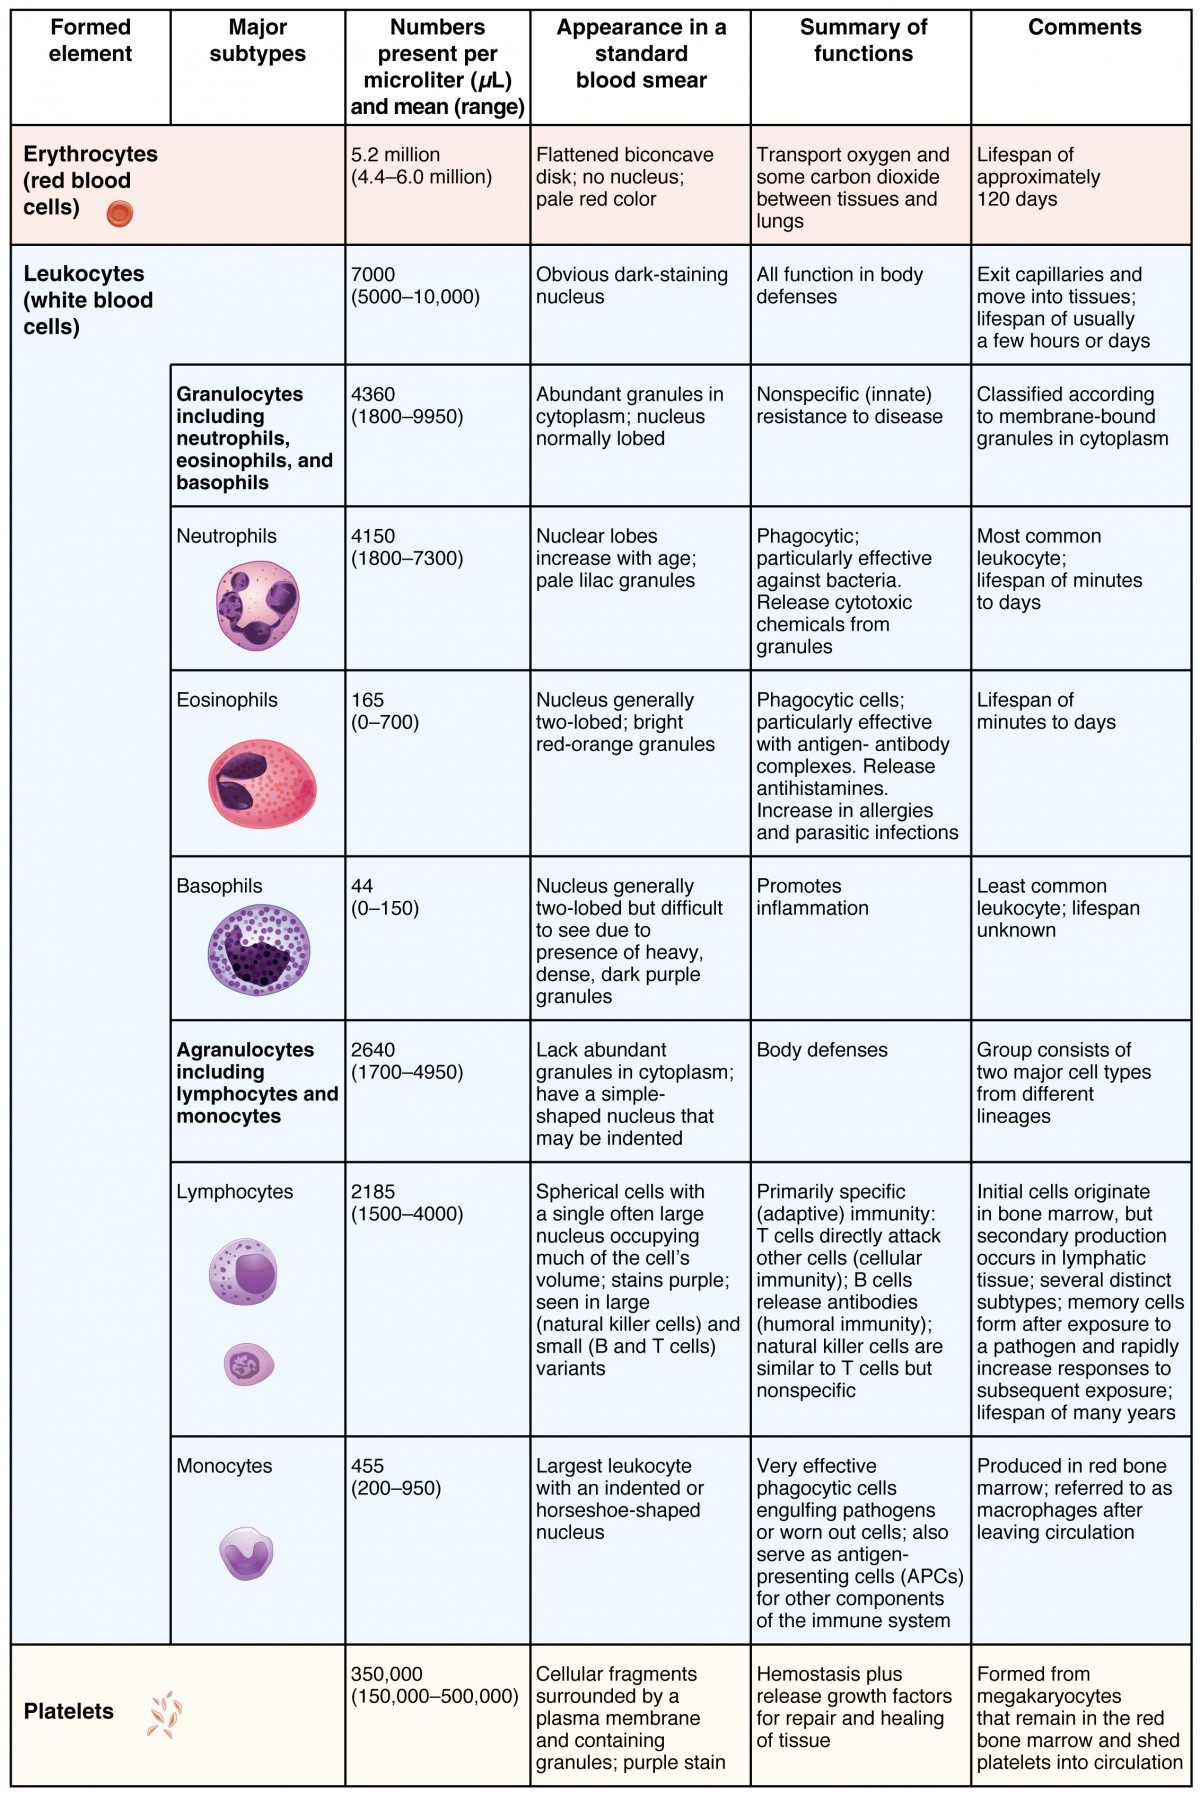 This table shows the different types of cells present in blood, the number of cells, their appearance, and a summary of their function.